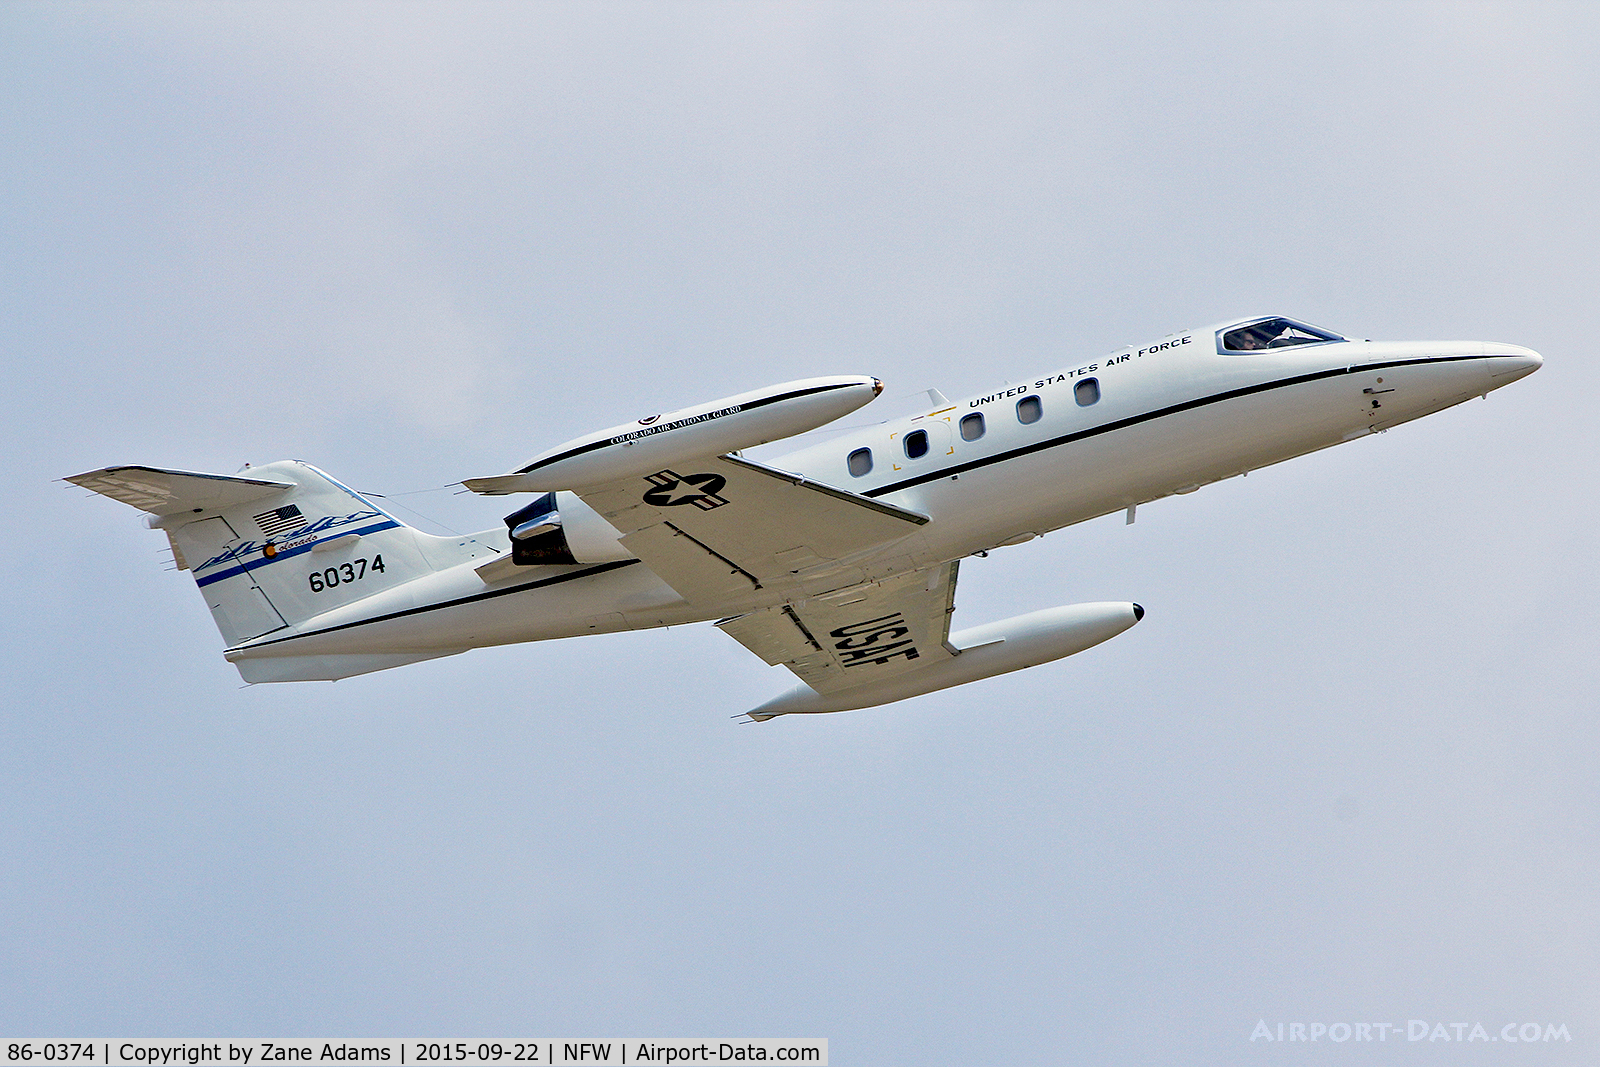 86-0374, 1986 Gates Learjet C-21A C/N 35A-626, Departing NAS Fort Worth